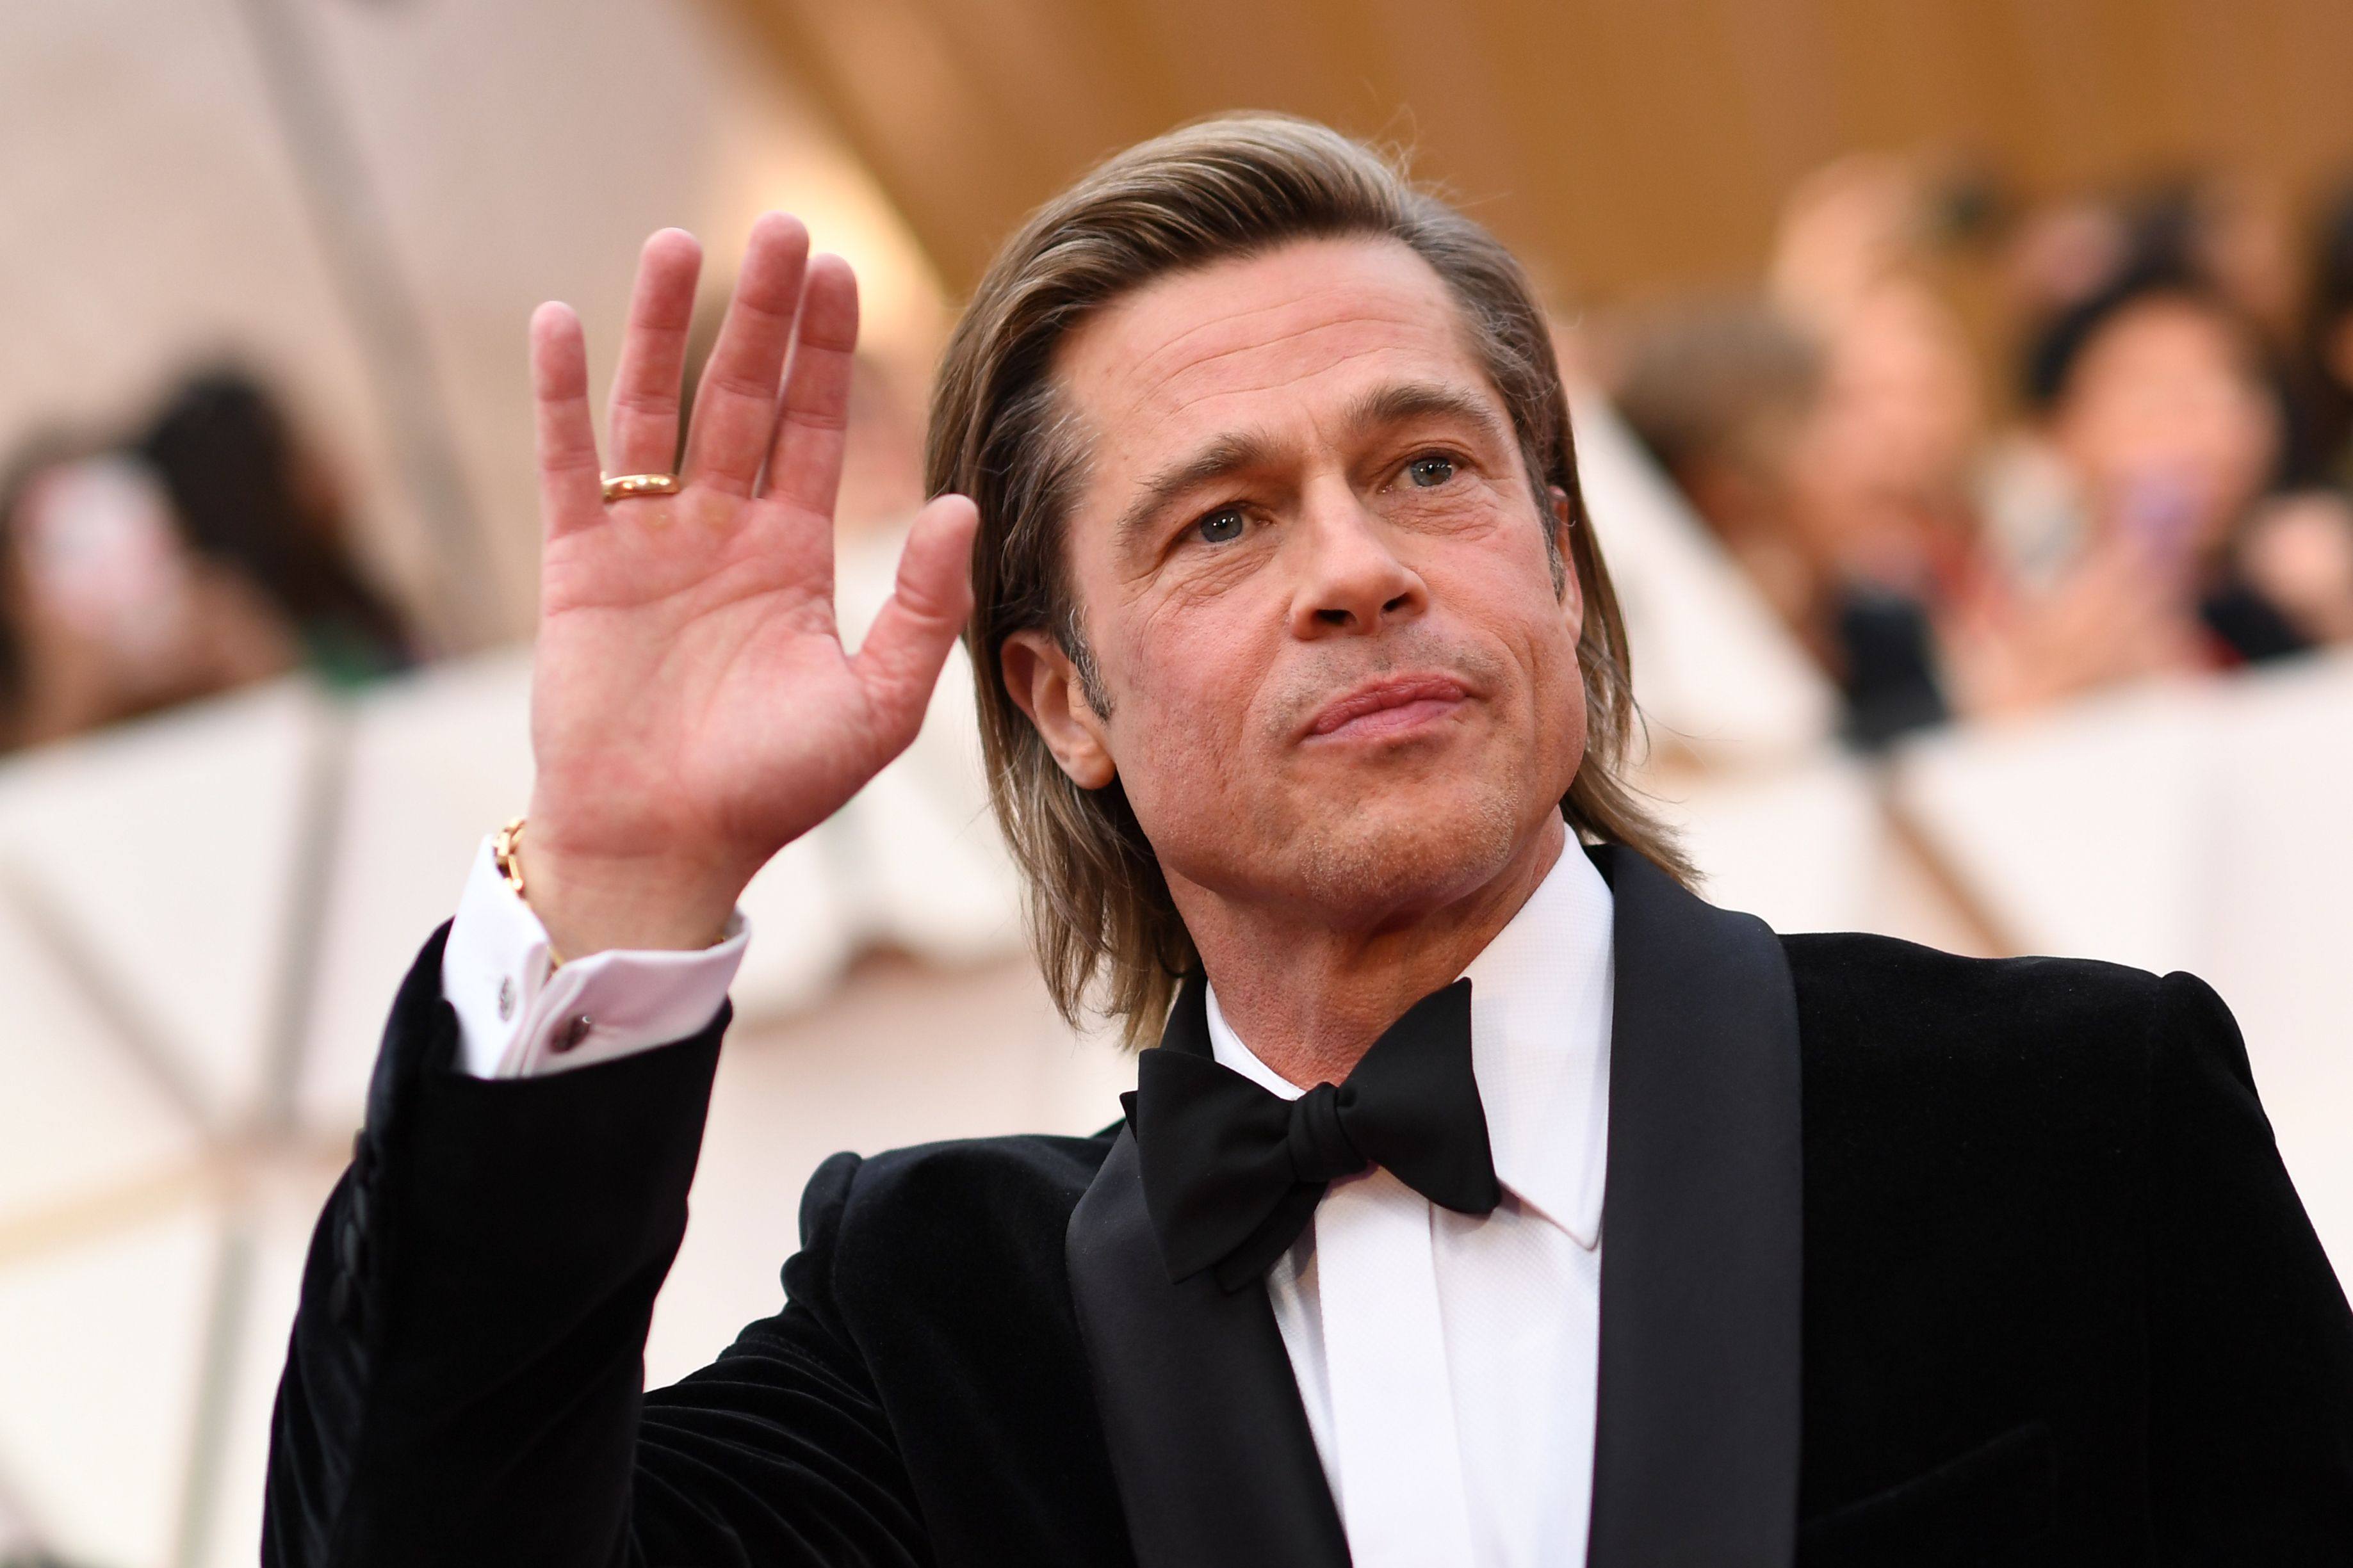 Brad Pitt has starred in a series of memorable roles over the years, but you may have missed him in Thelma & Louise or By the Sea. Photo: AFP